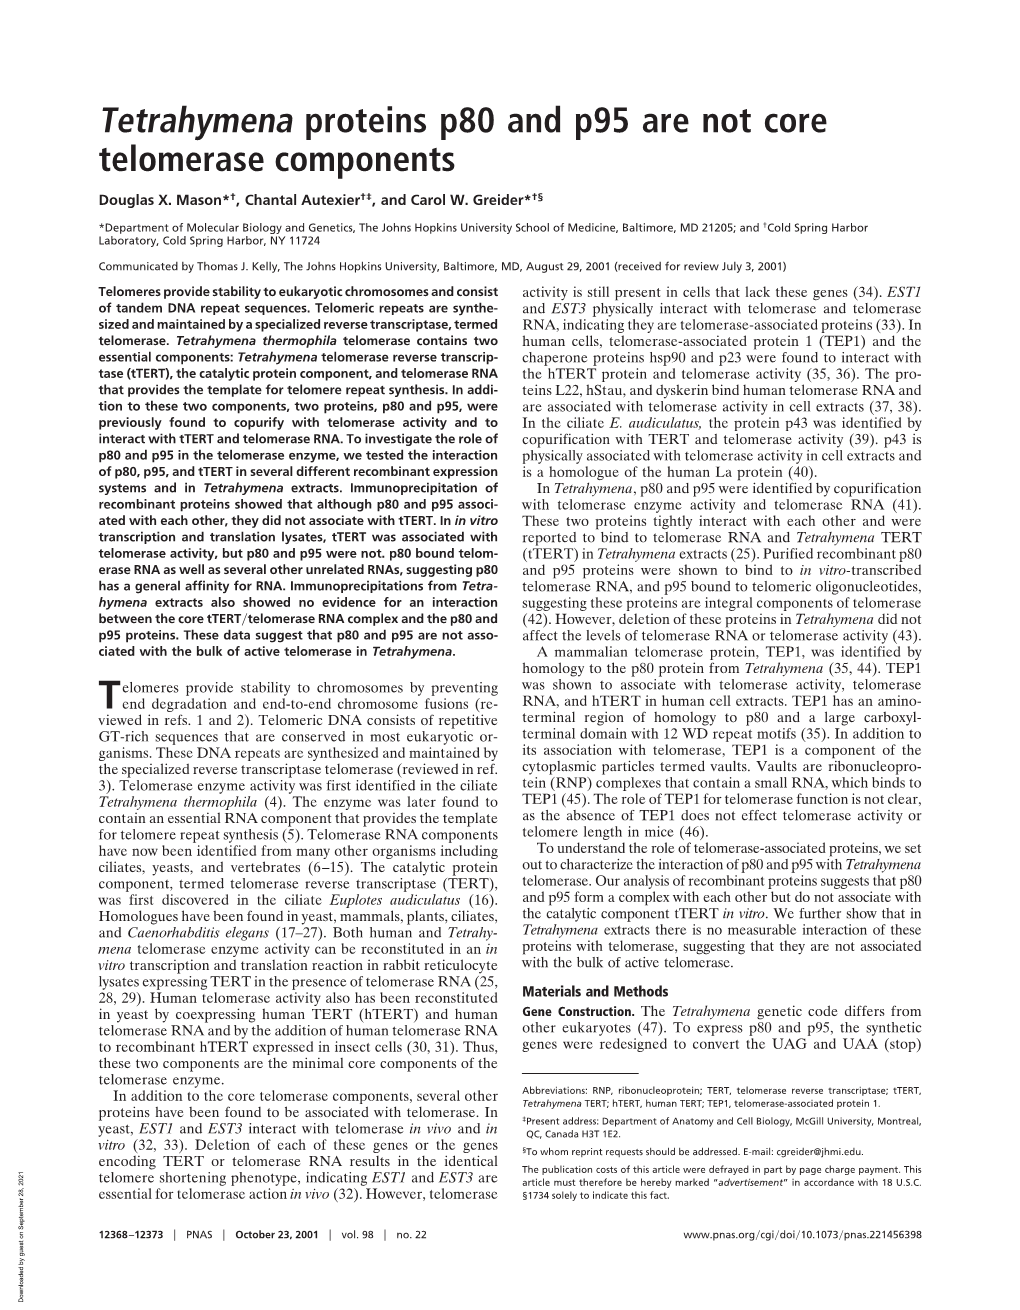 Tetrahymena Proteins P80 and P95 Are Not Core Telomerase Components